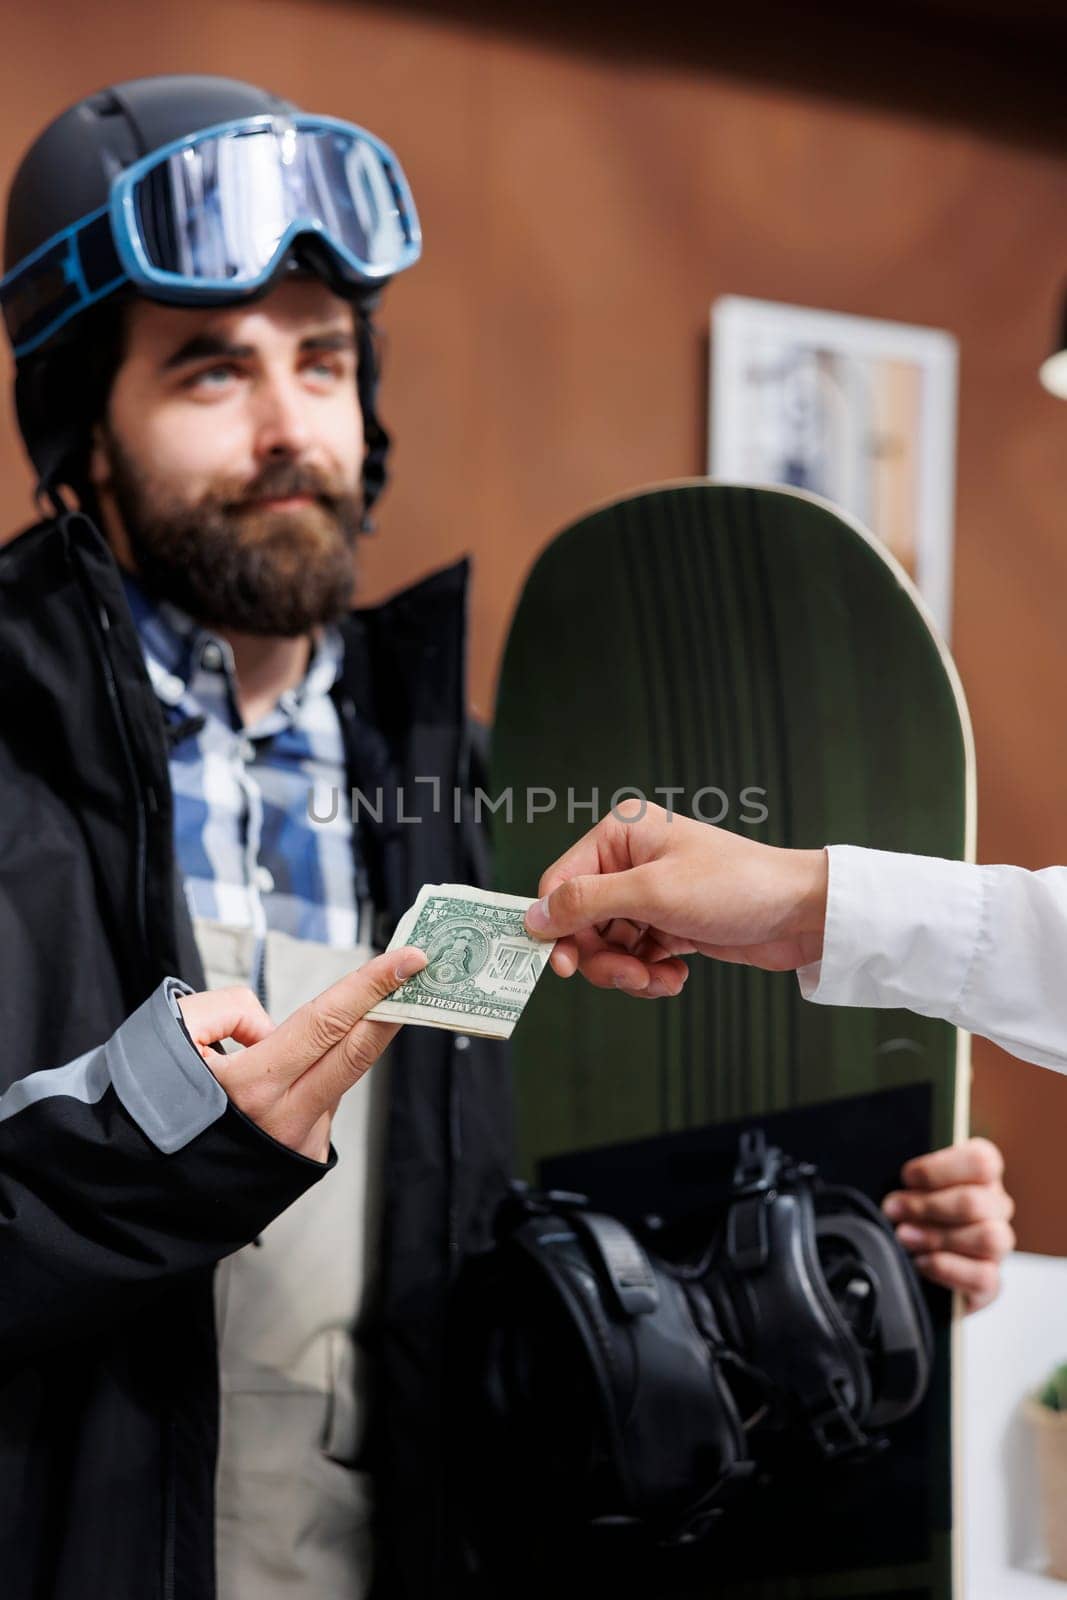 Male snowboarder tipping hotel employee by DCStudio